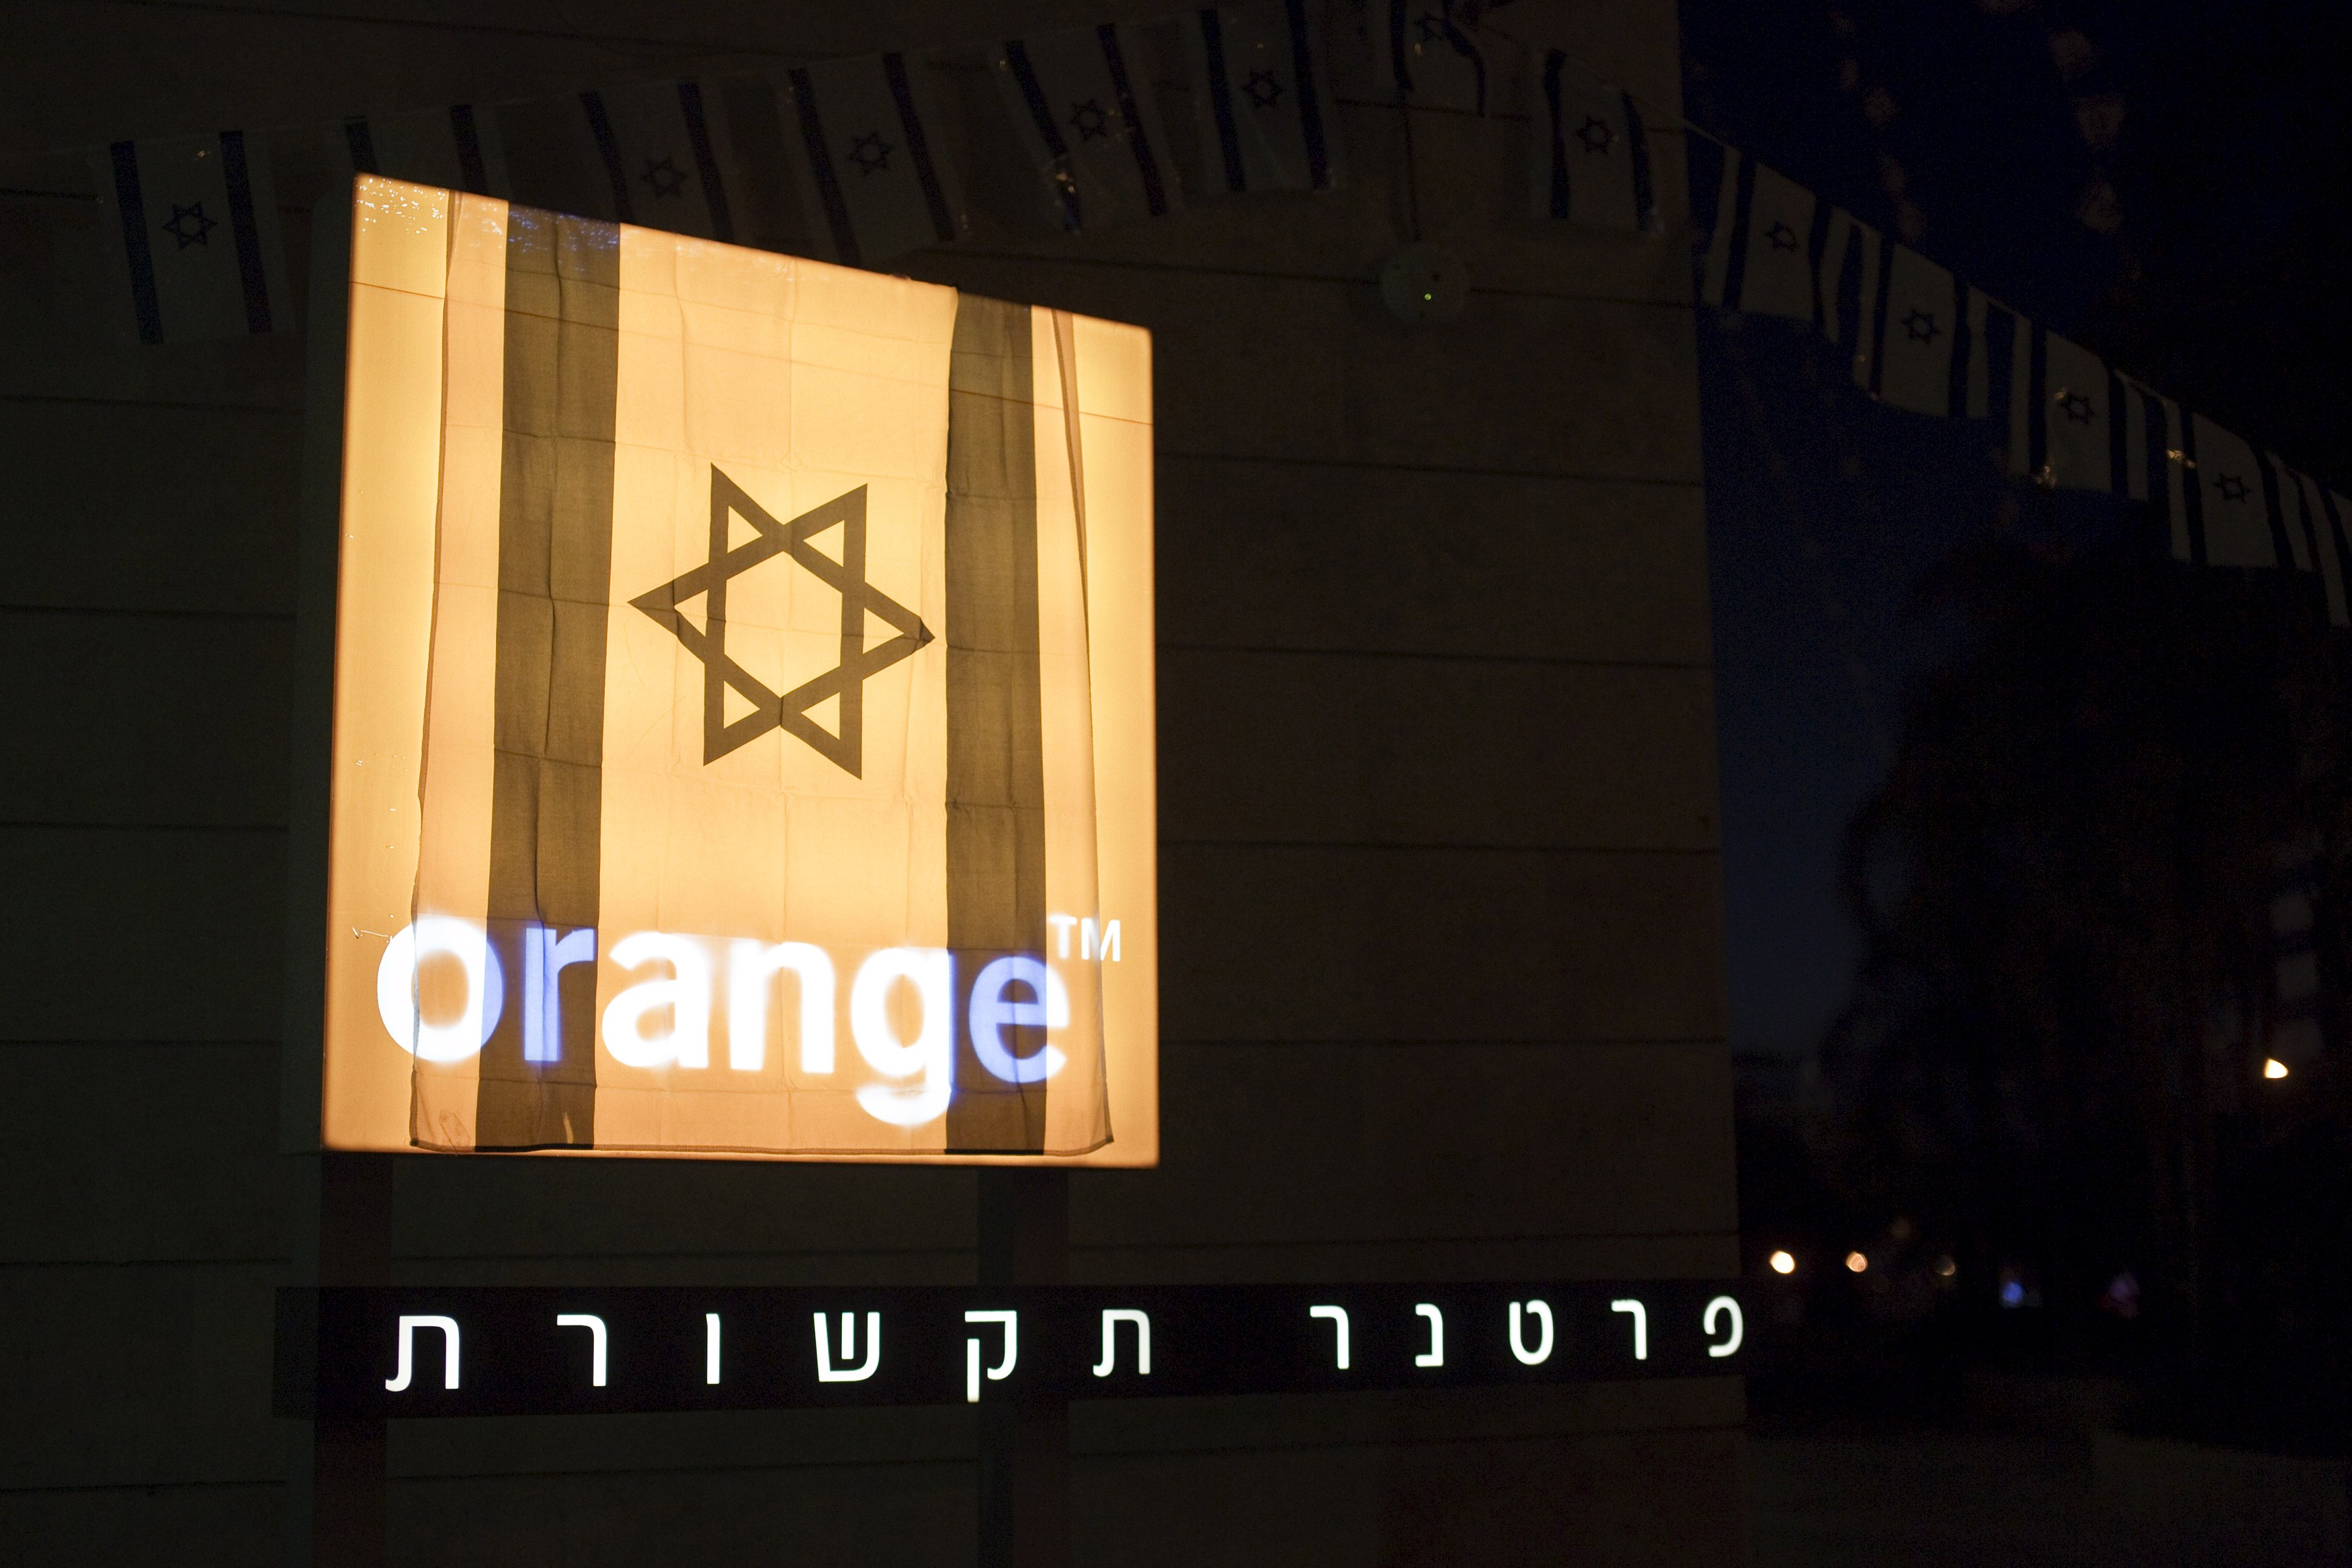 Israel protested to France on Thursday after the head of partly state-owned French telecom giant Orange said it intended to end a brand licensing deal with Partner, drawing accusations it was bending to a pro-Palestinian boycott movement.